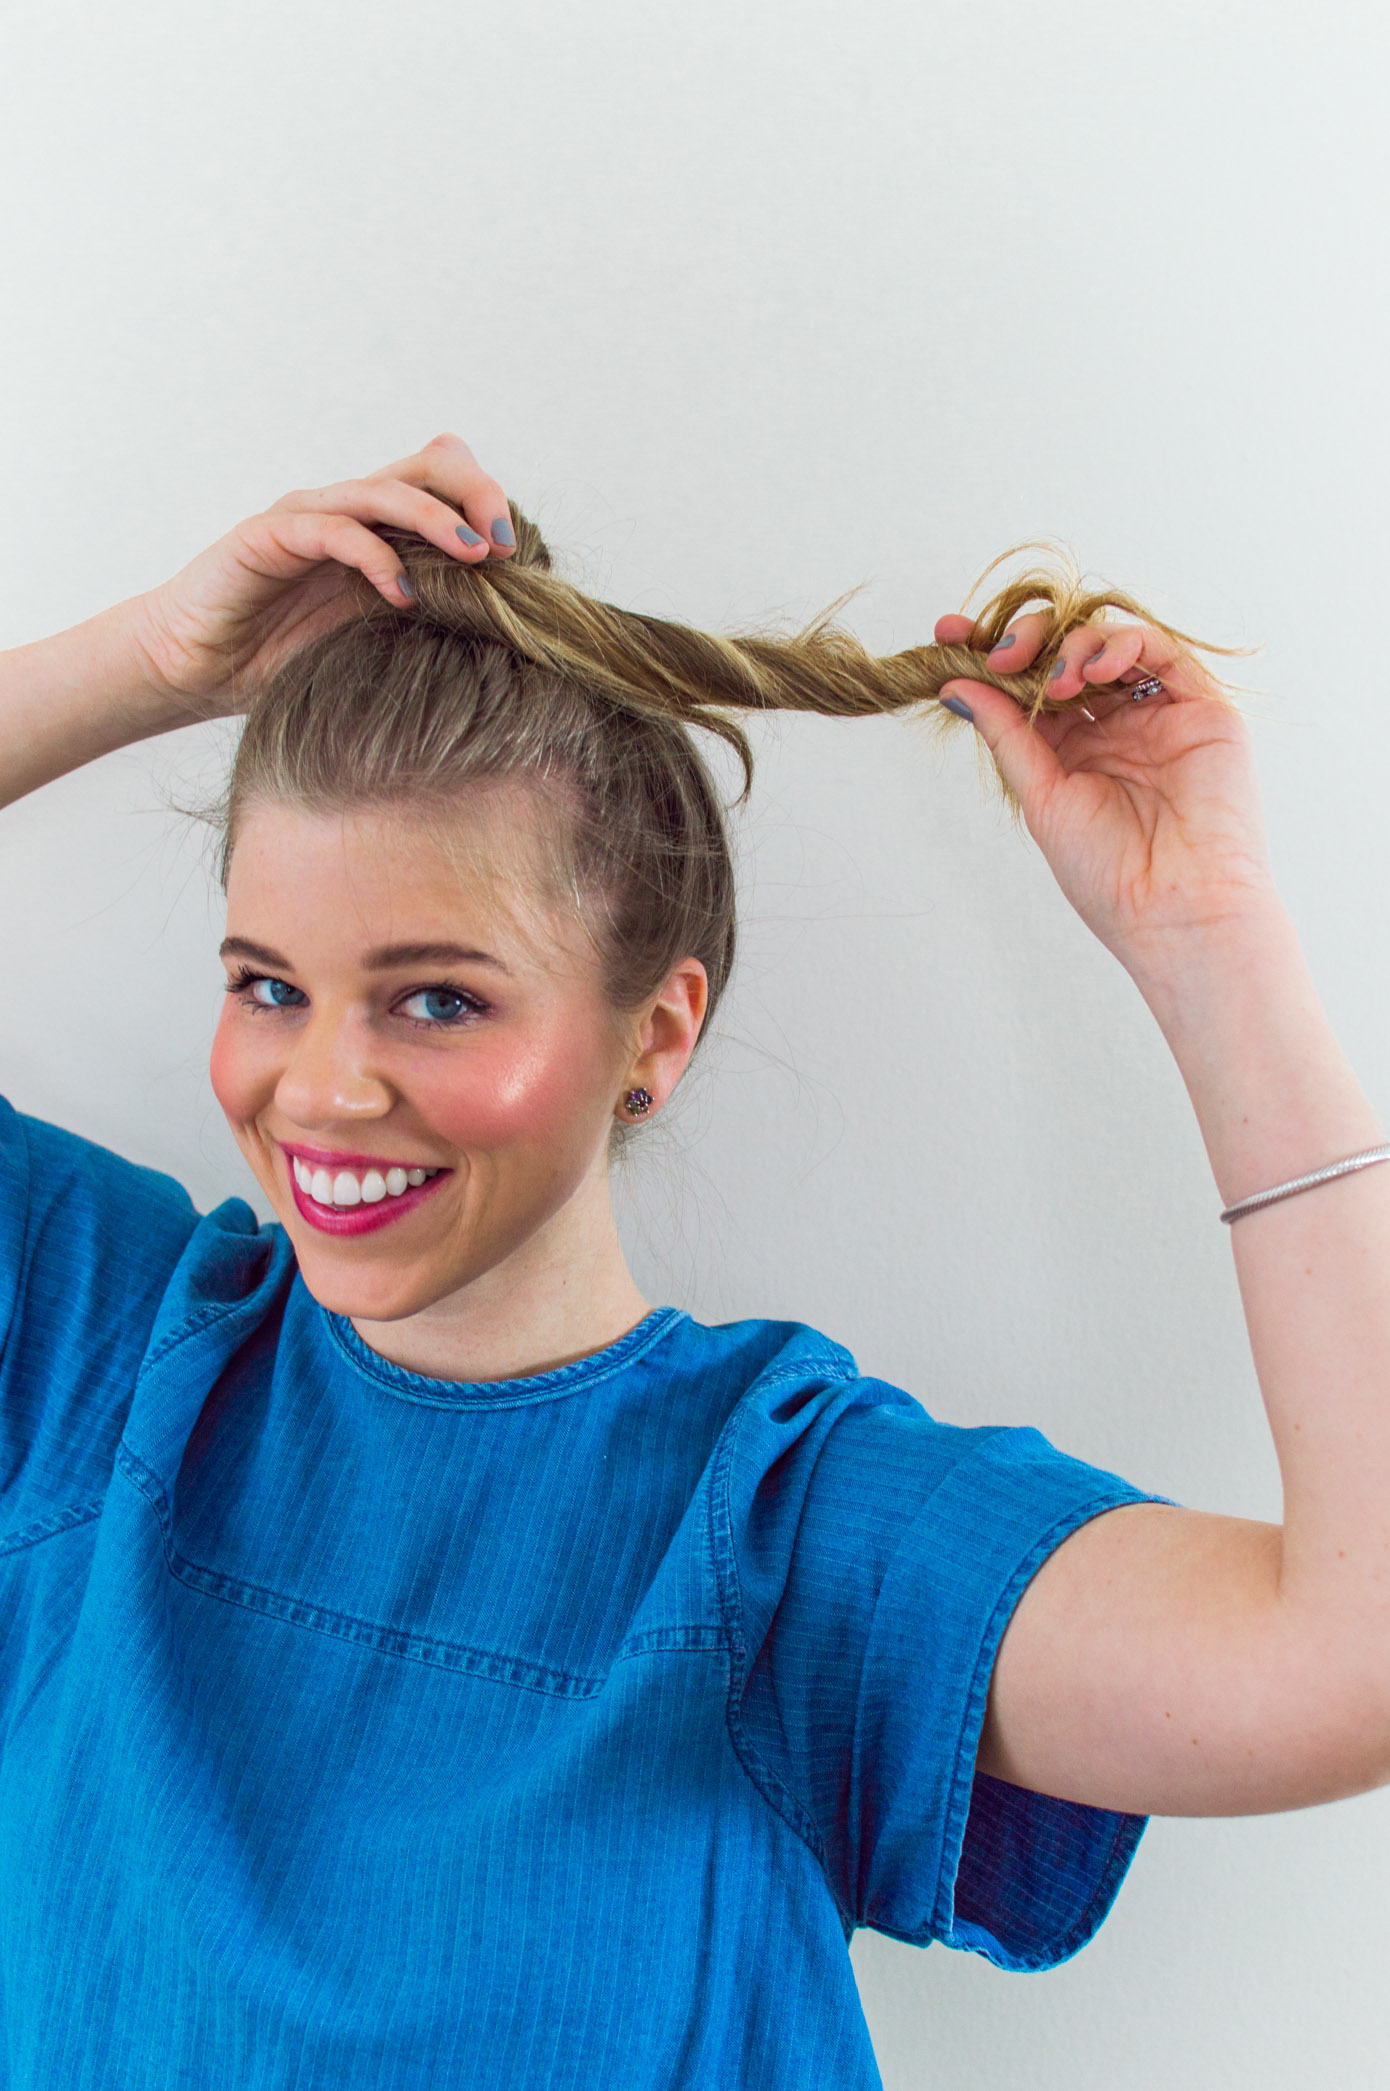 3 Hairstyles for NYFW | Messy Top Knot Hair Tutorials | Louella Reese Life & Style Blog